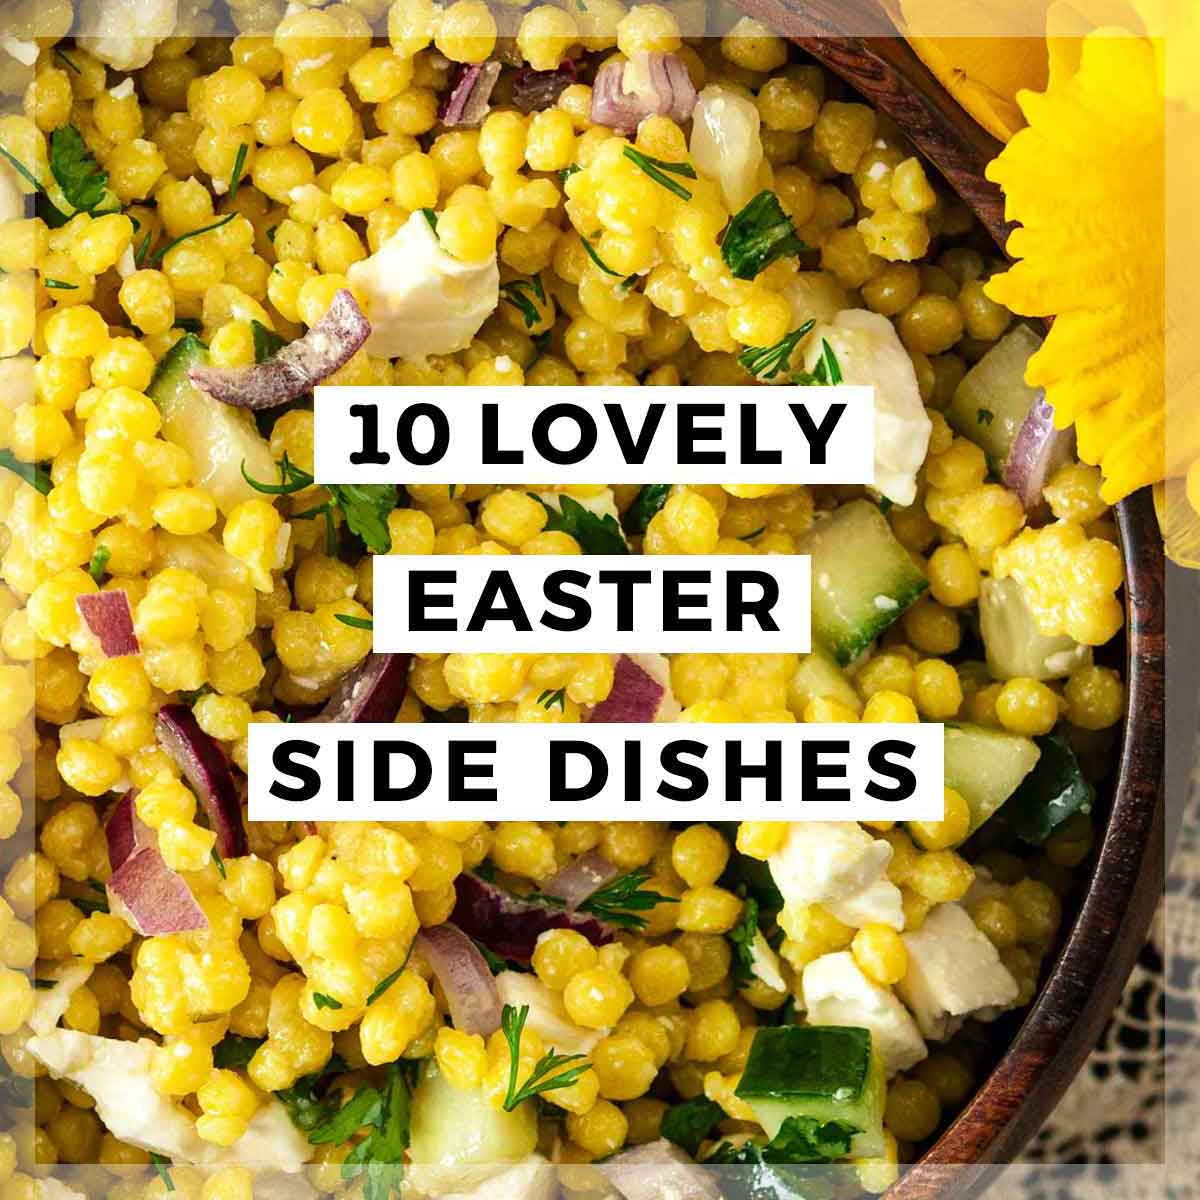 A bowl of pearl couscous surrounded by flowers, with a title that says "10 Lovely Easter Side Dishes."